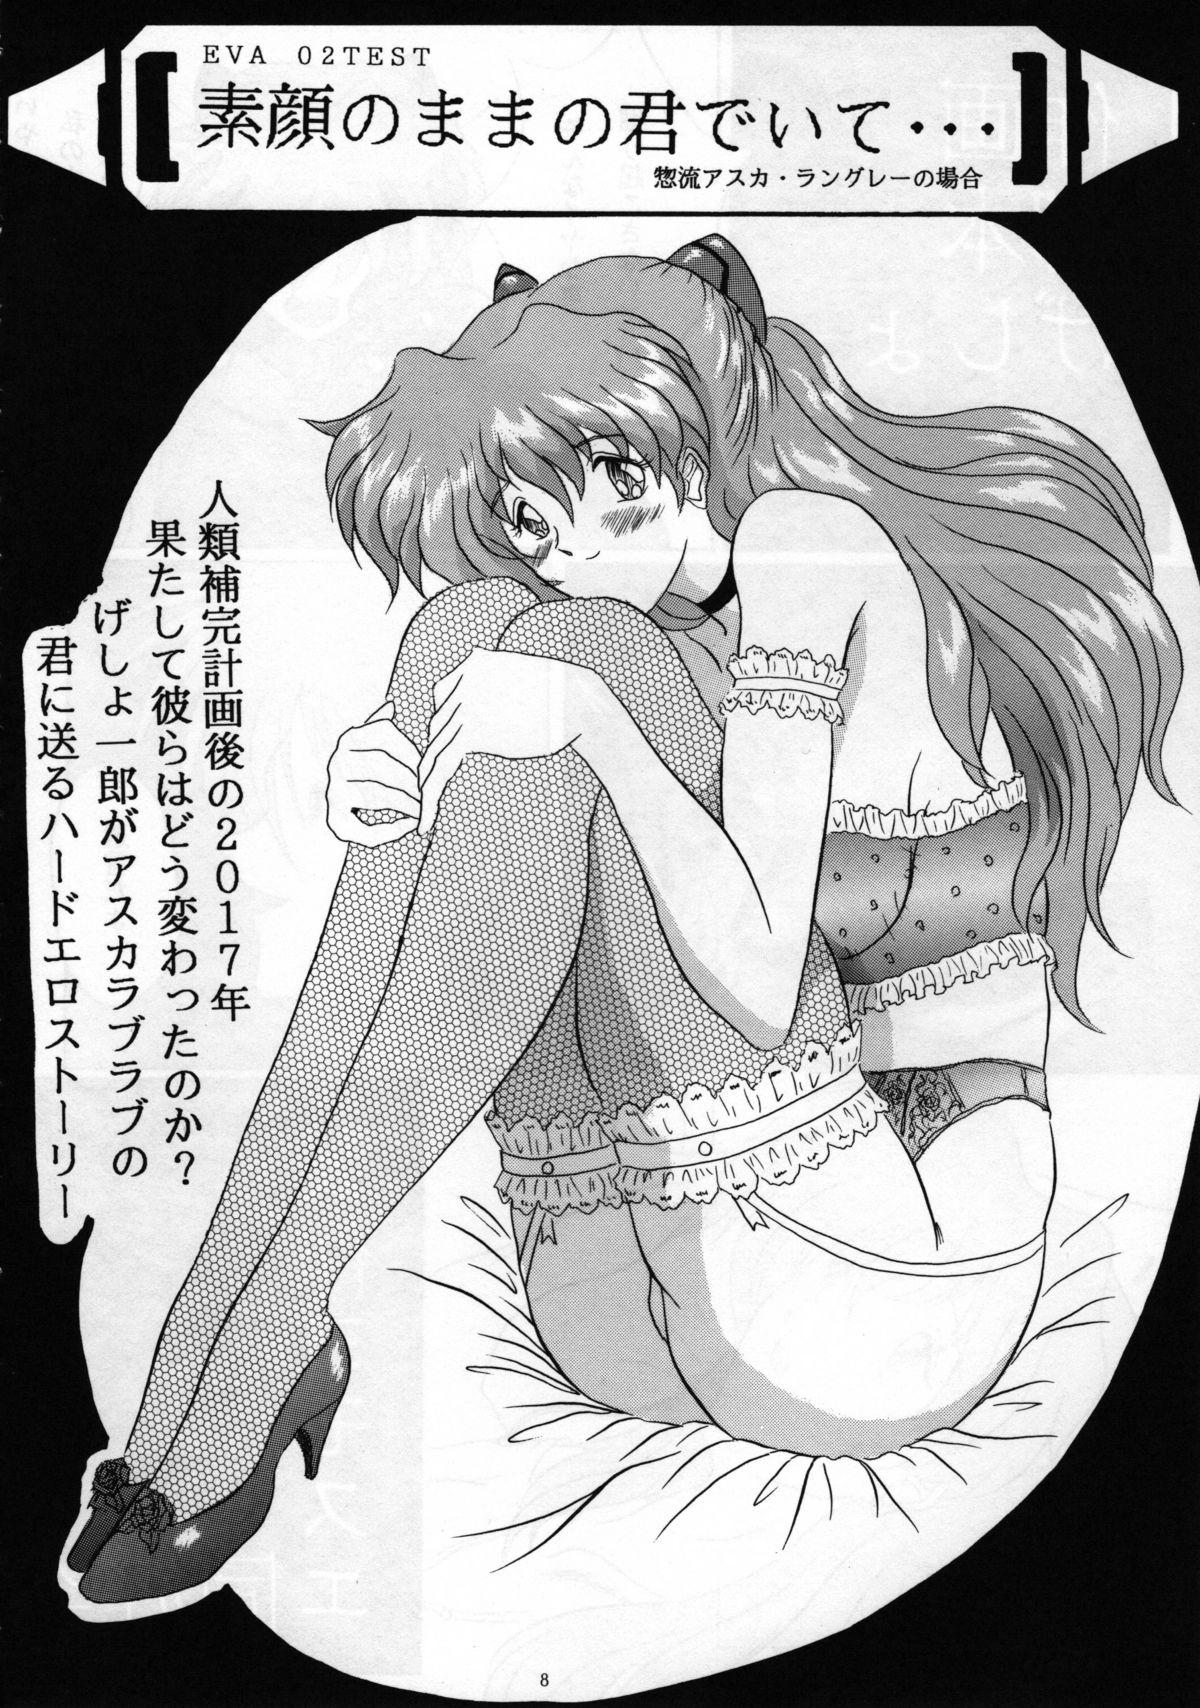 Gay Tattoos THE OMNIVOUS XI - Neon genesis evangelion Reverse Cowgirl - Page 7